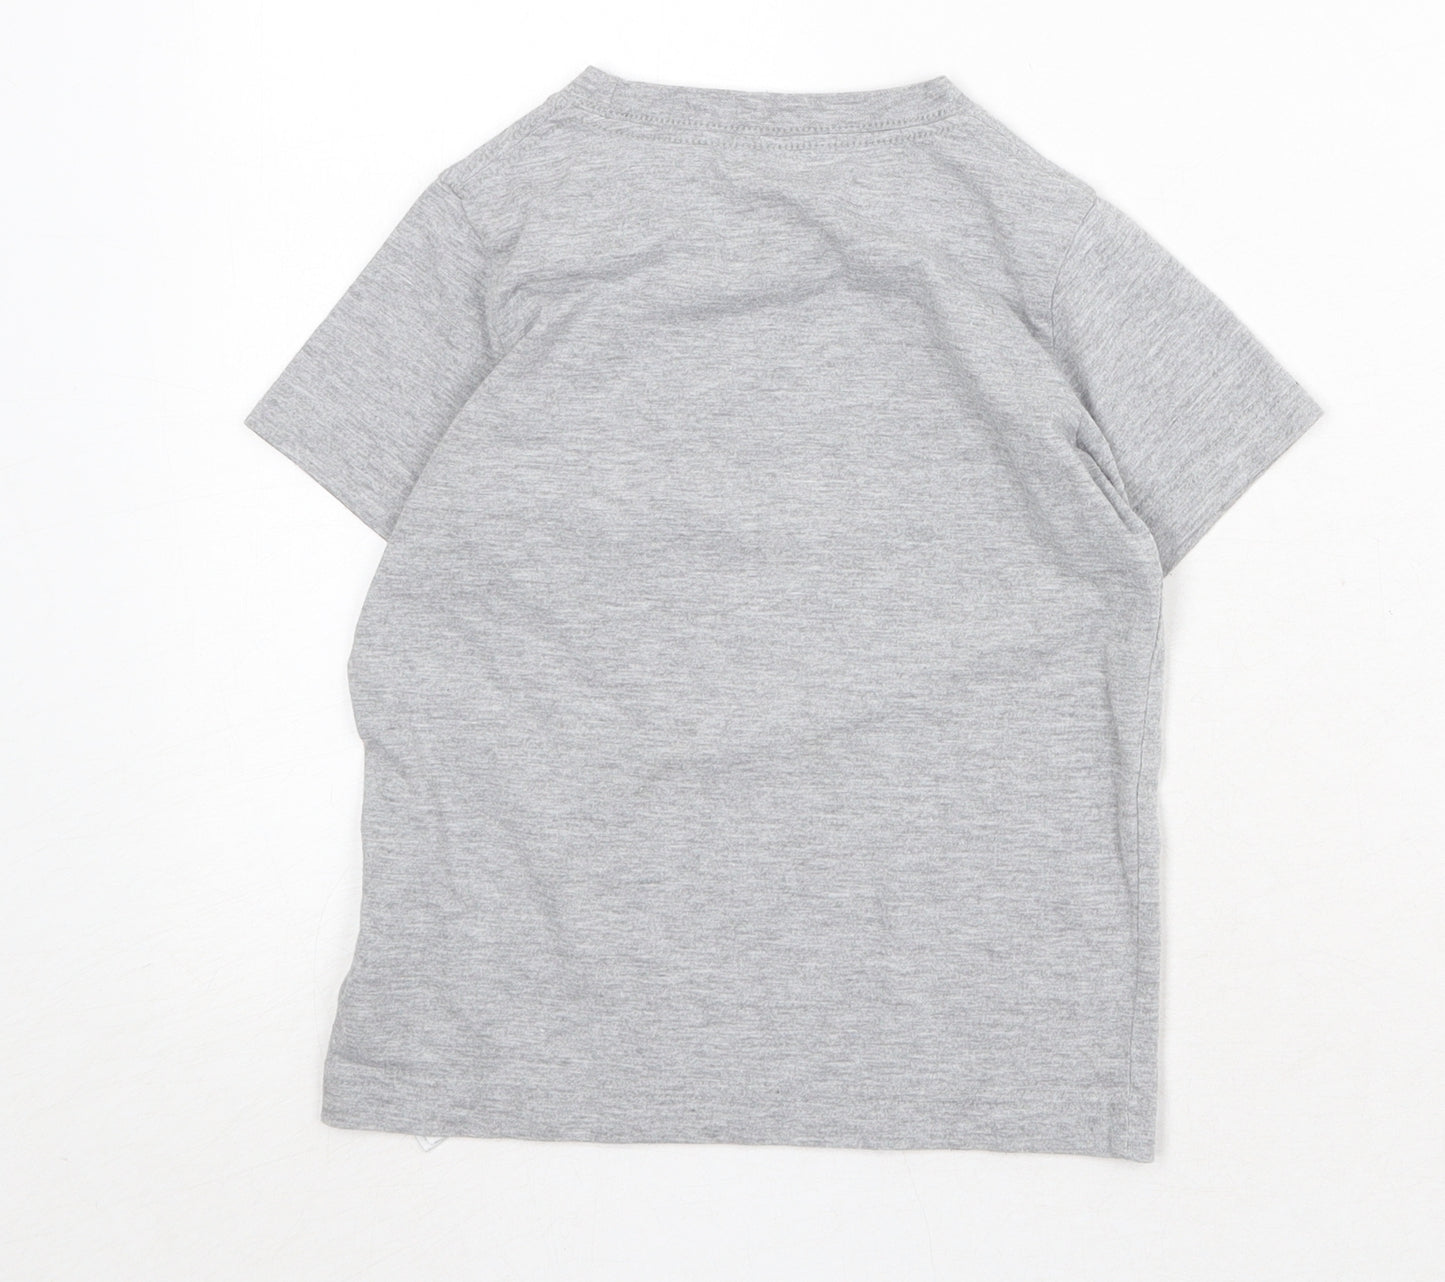 Converse Boys Grey Cotton Pullover T-Shirt Size 4-5 Years Crew Neck Pullover